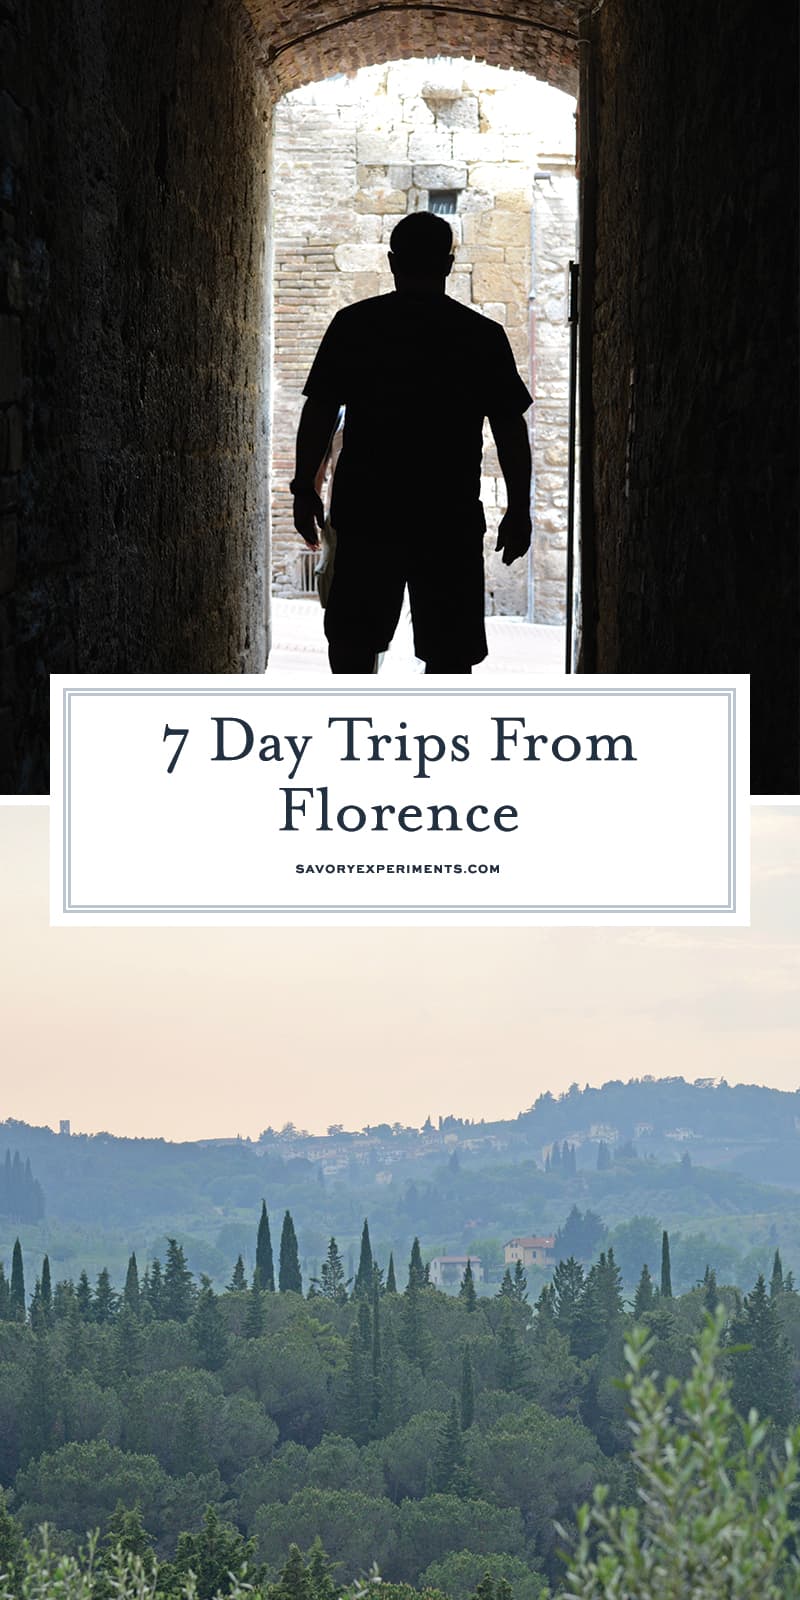 If you are looking to escape the bustle of the city, here are 7 fabulous day trips from Florence! #florence #tuscany www.savoryexperiments.com